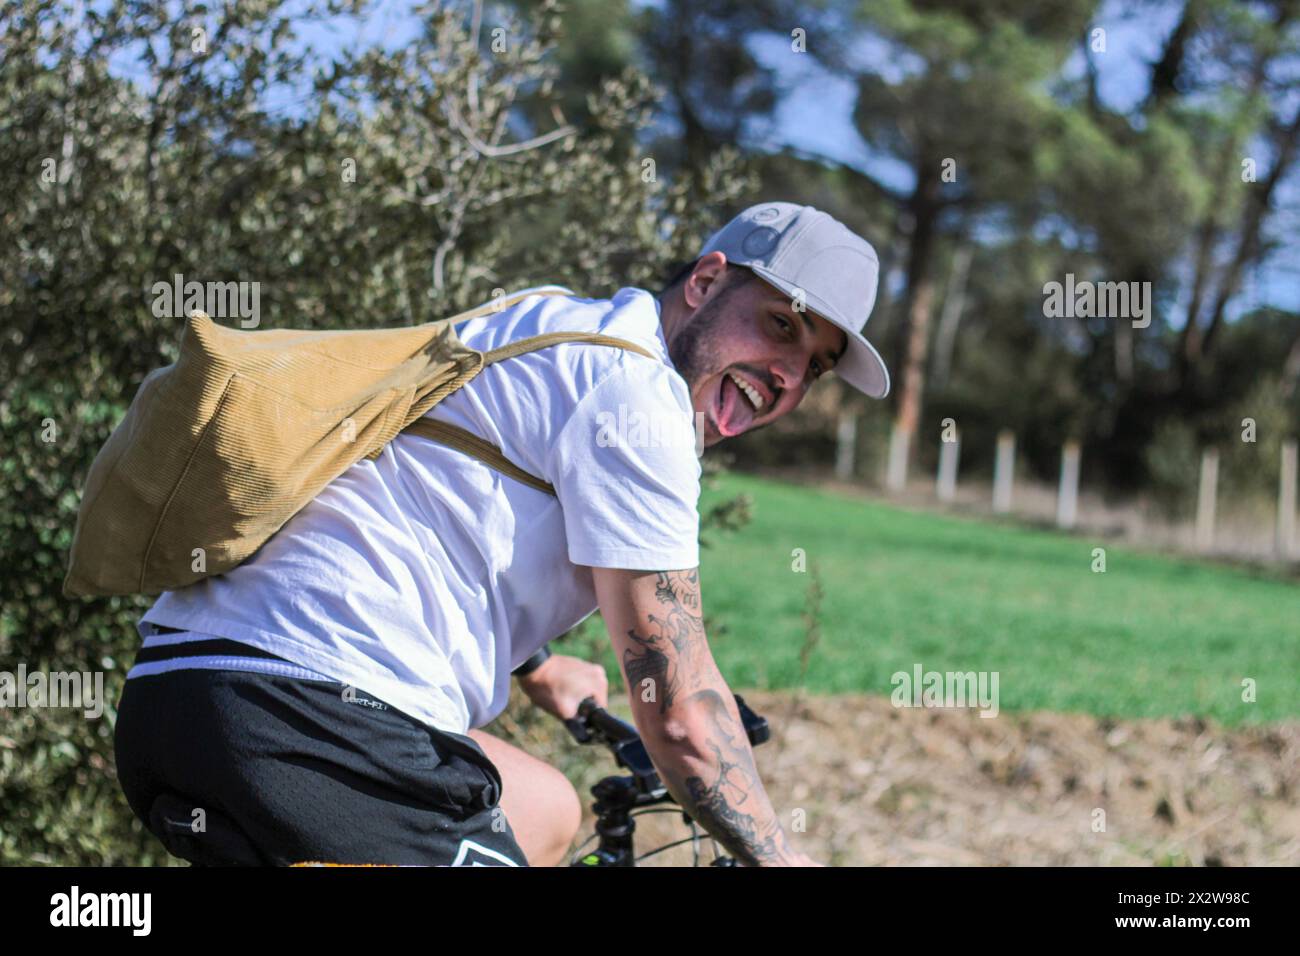 Catch a glimpse of adventure as a young male, tongue out in exhaustion, glances back while cycling through the challenges of nature, pushing his limit Stock Photo